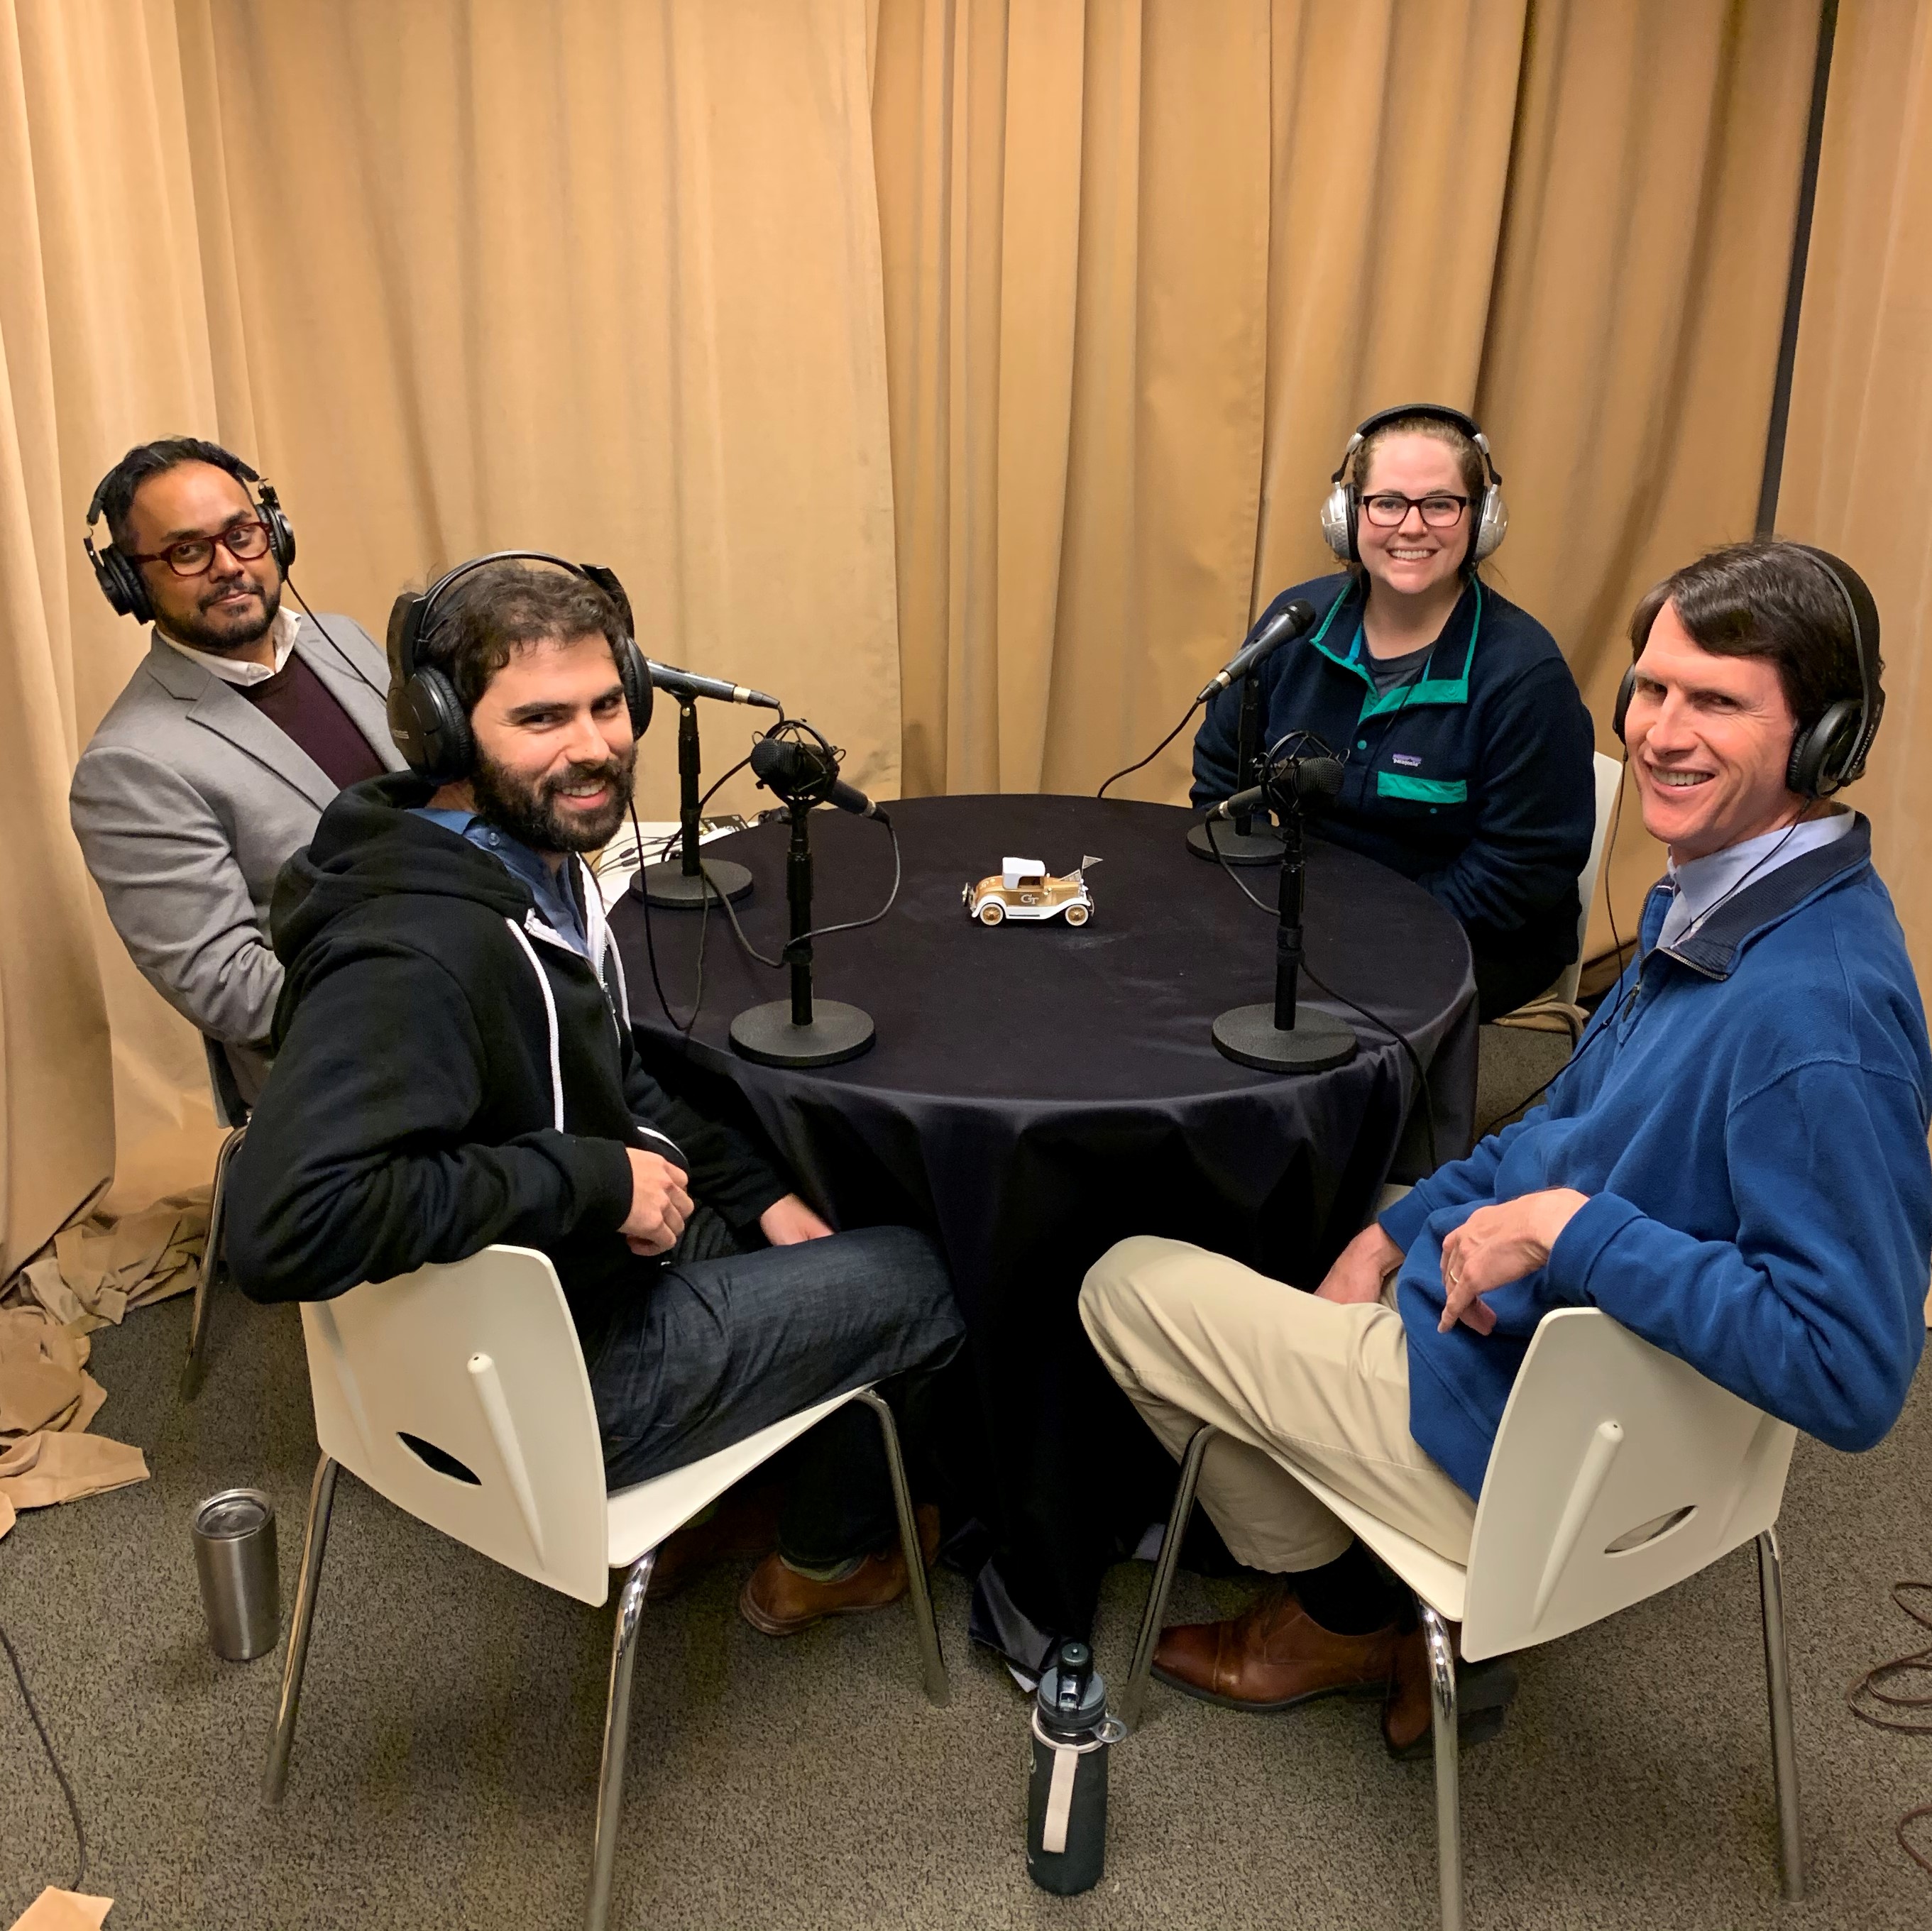 Saurabh Bose, Ben Rosenthal, host Jasmine Howard, and Dr. Eric Overby join us on our ramblin' roundtable podcast discussing hot topics in FinTech.